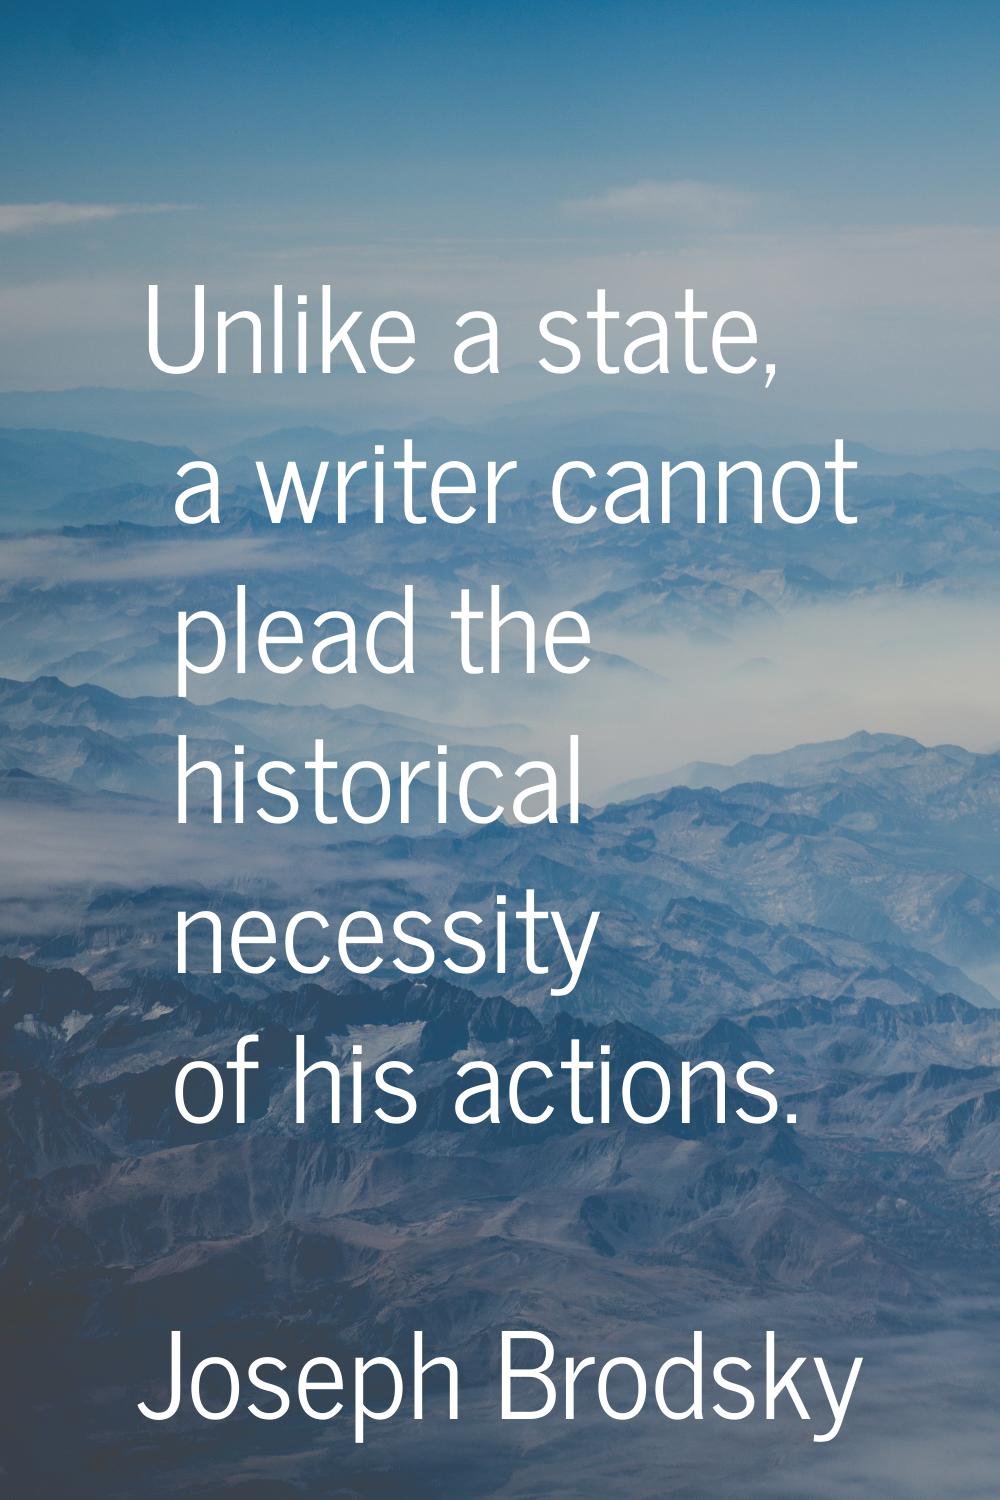 Unlike a state, a writer cannot plead the historical necessity of his actions.